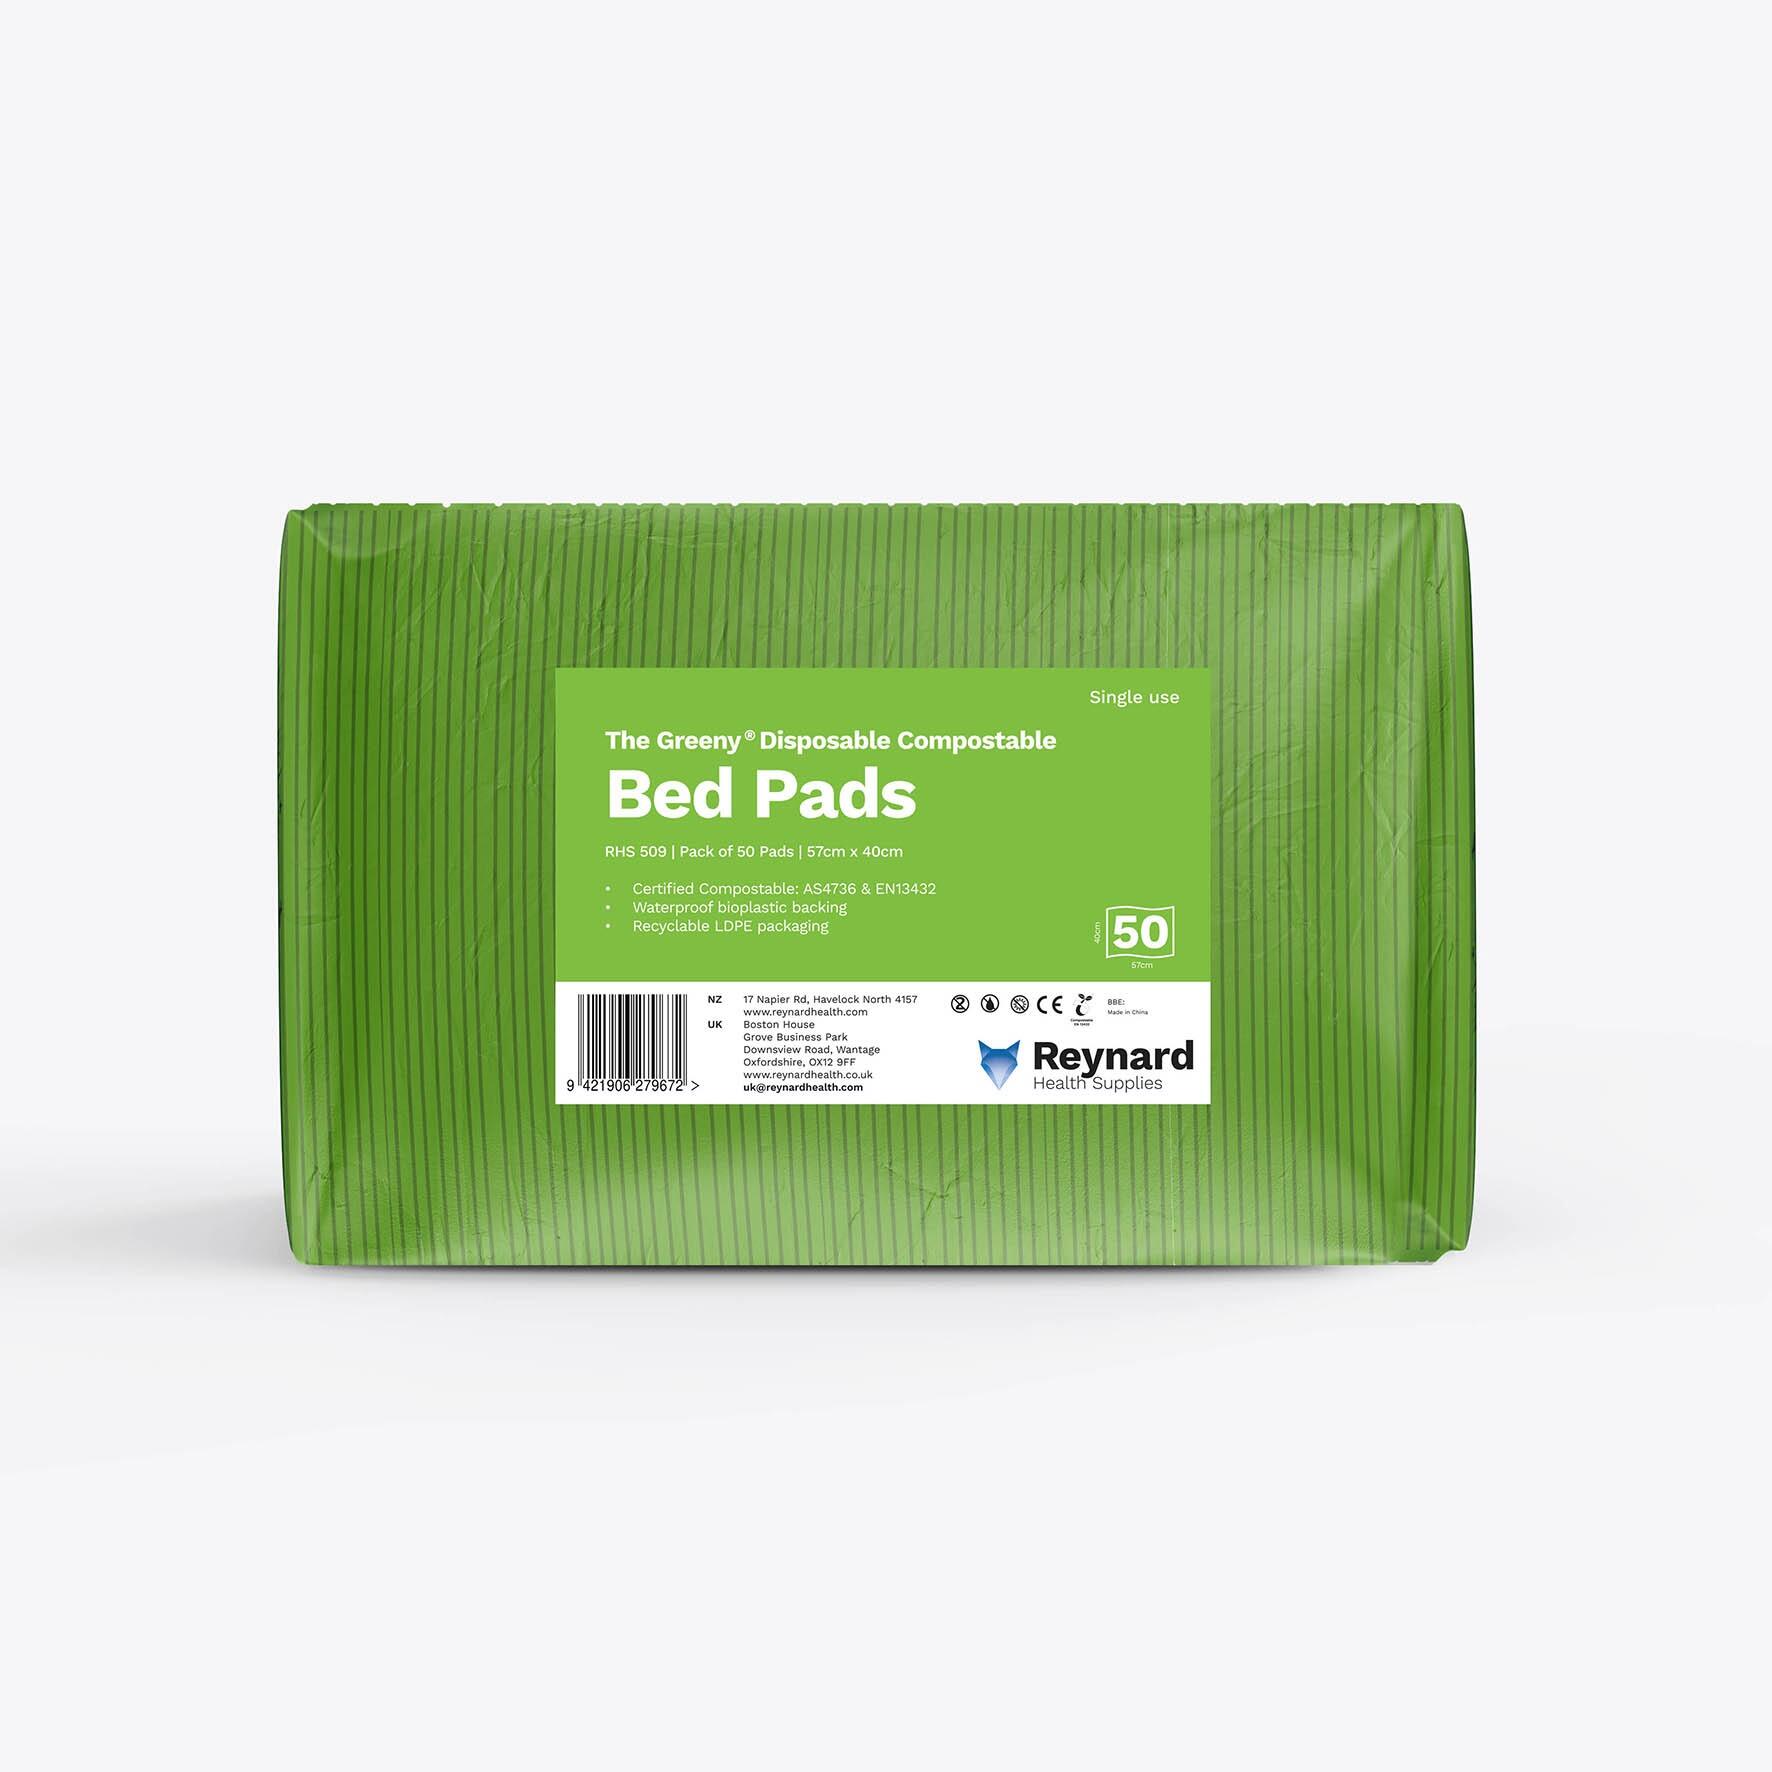 Reynard Greenys Disposable Compostable Bed Pads